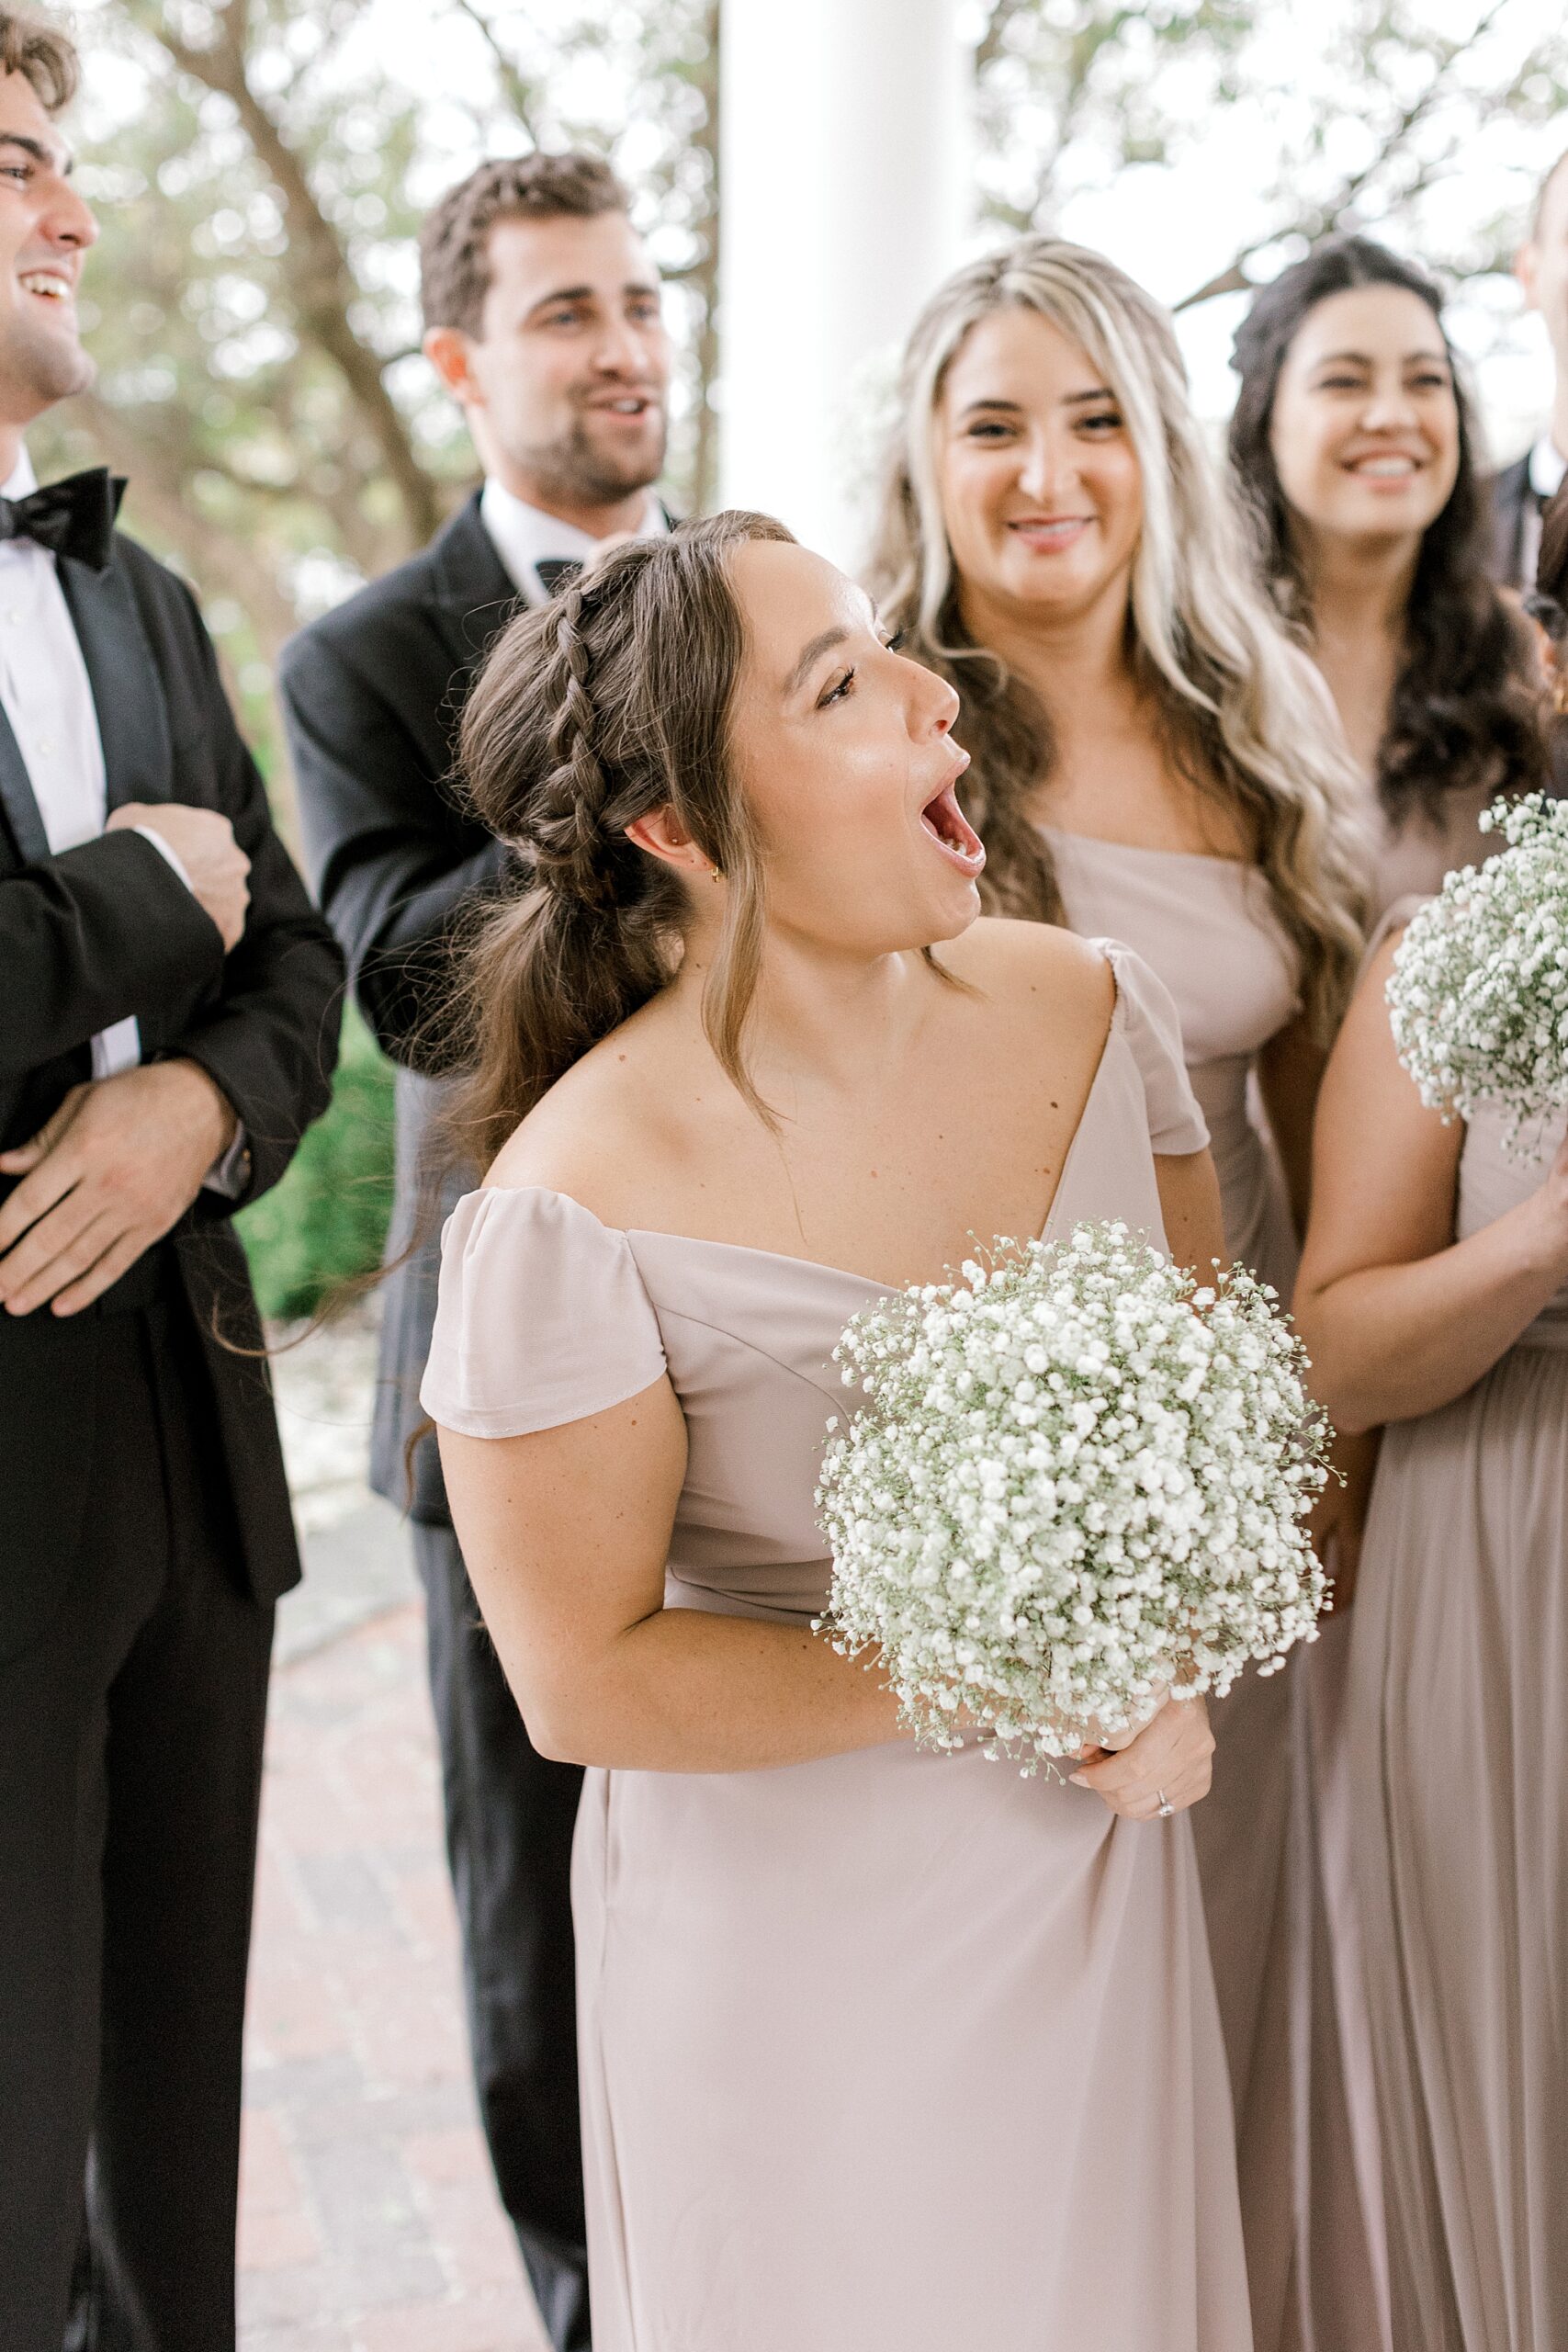 bride holding bouquet of baby's breath makes face towards newlyweds